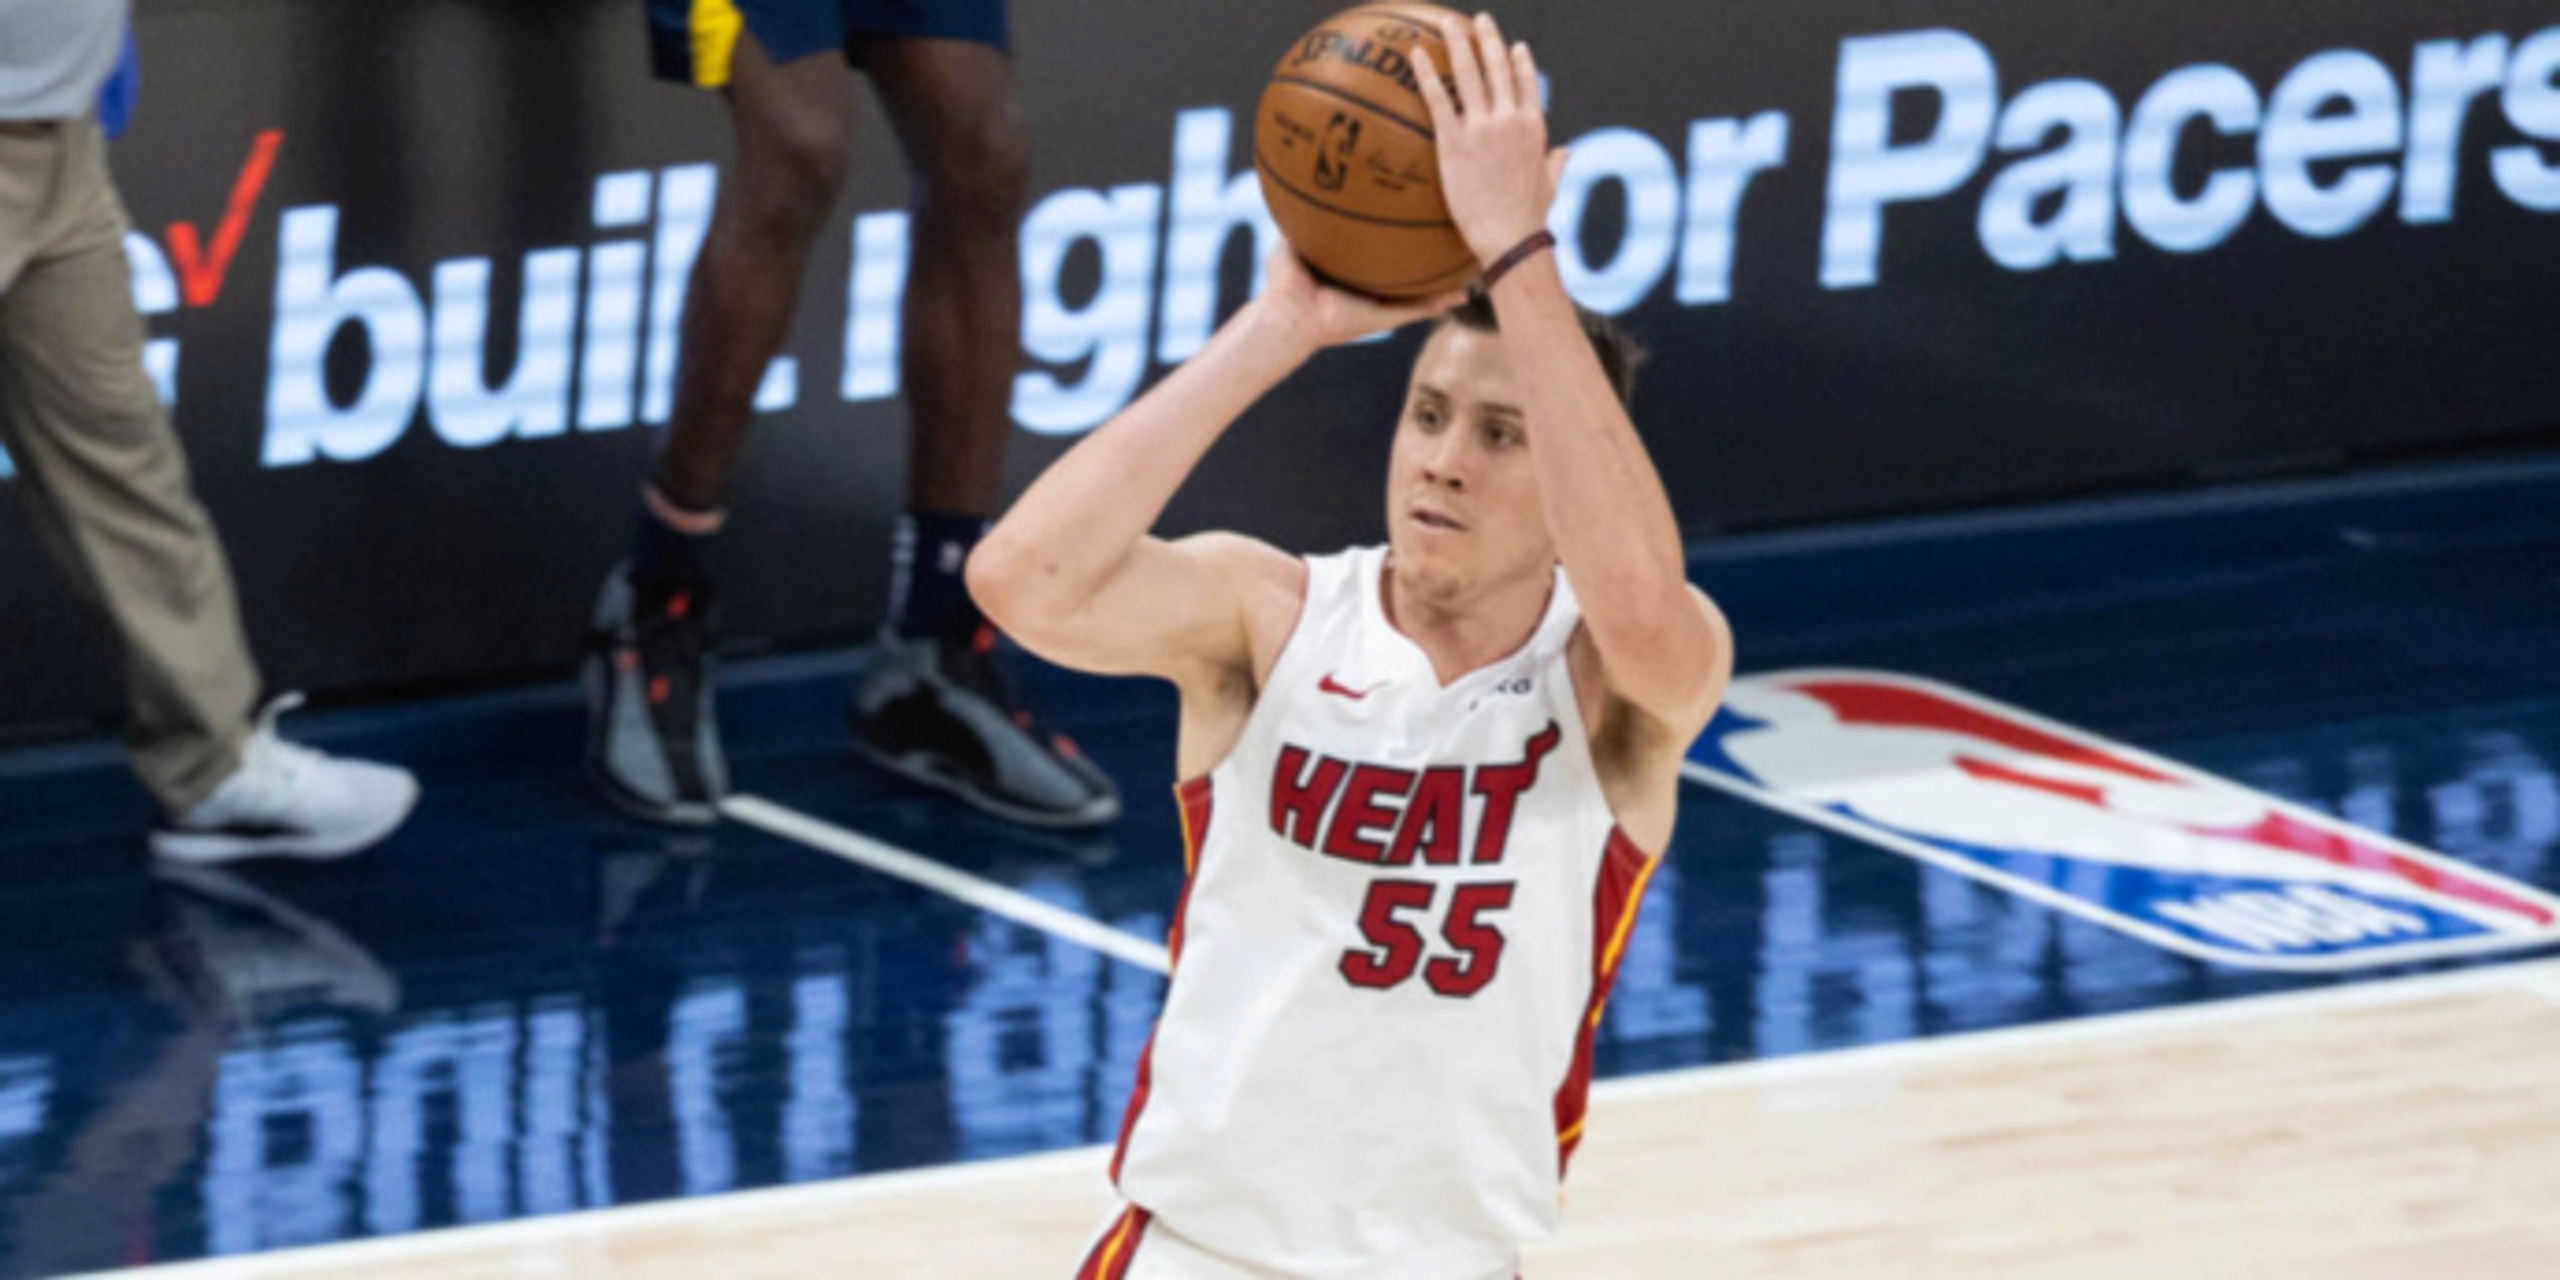 Duncan Robinson becomes fastest player in NBA history to make 500 threes